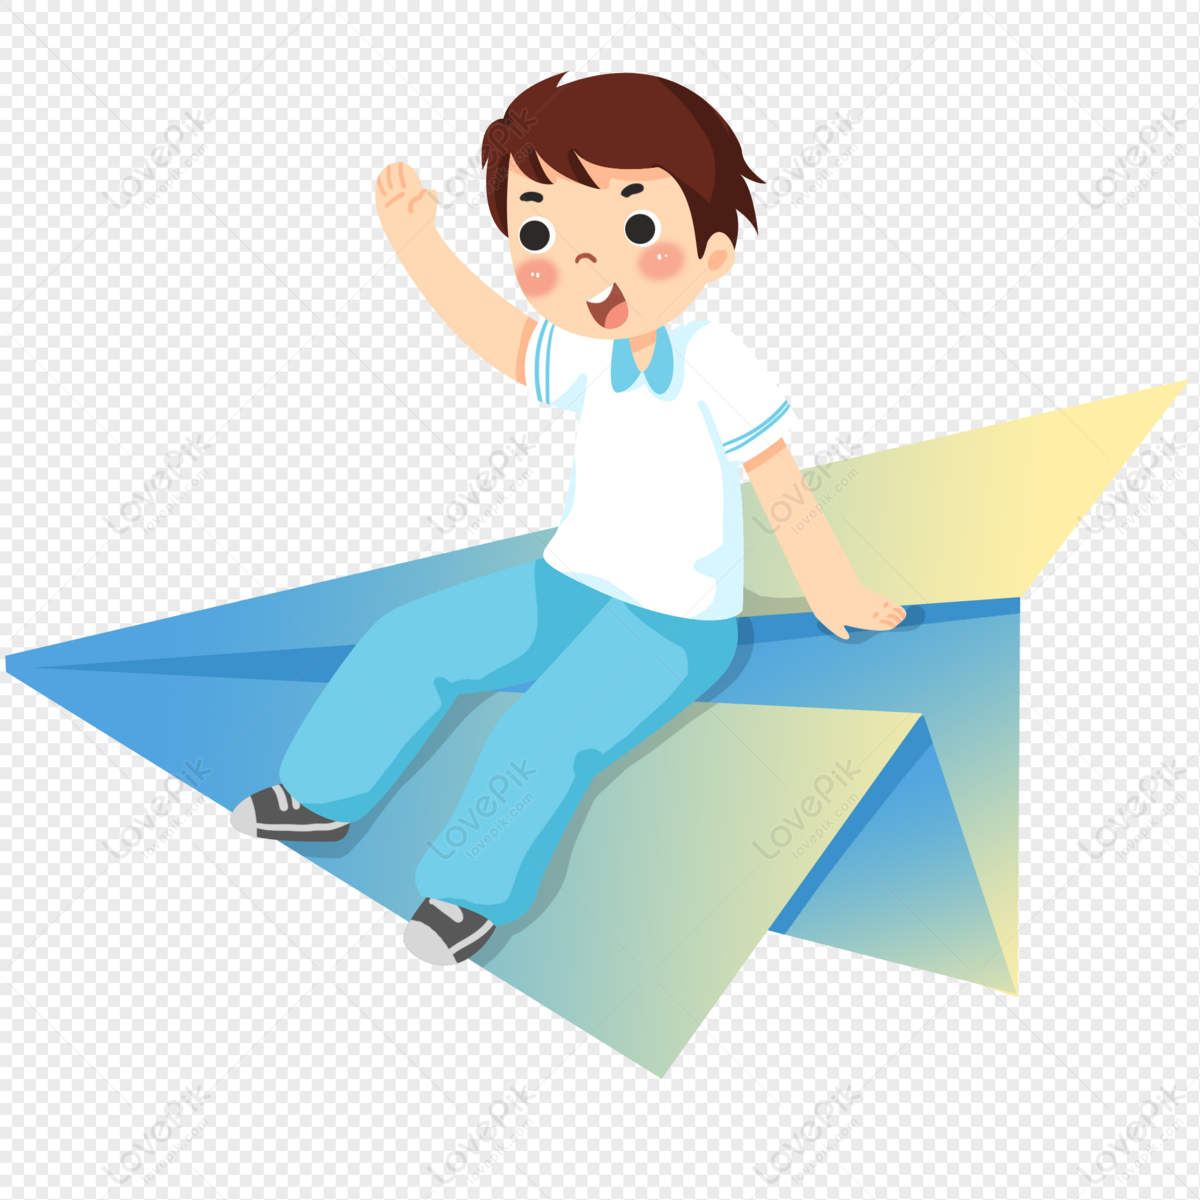 Male Student Waving On A Paper Plane Saying Goodbye Free PNG And Clipart  Image For Free Download - Lovepik | 401329779